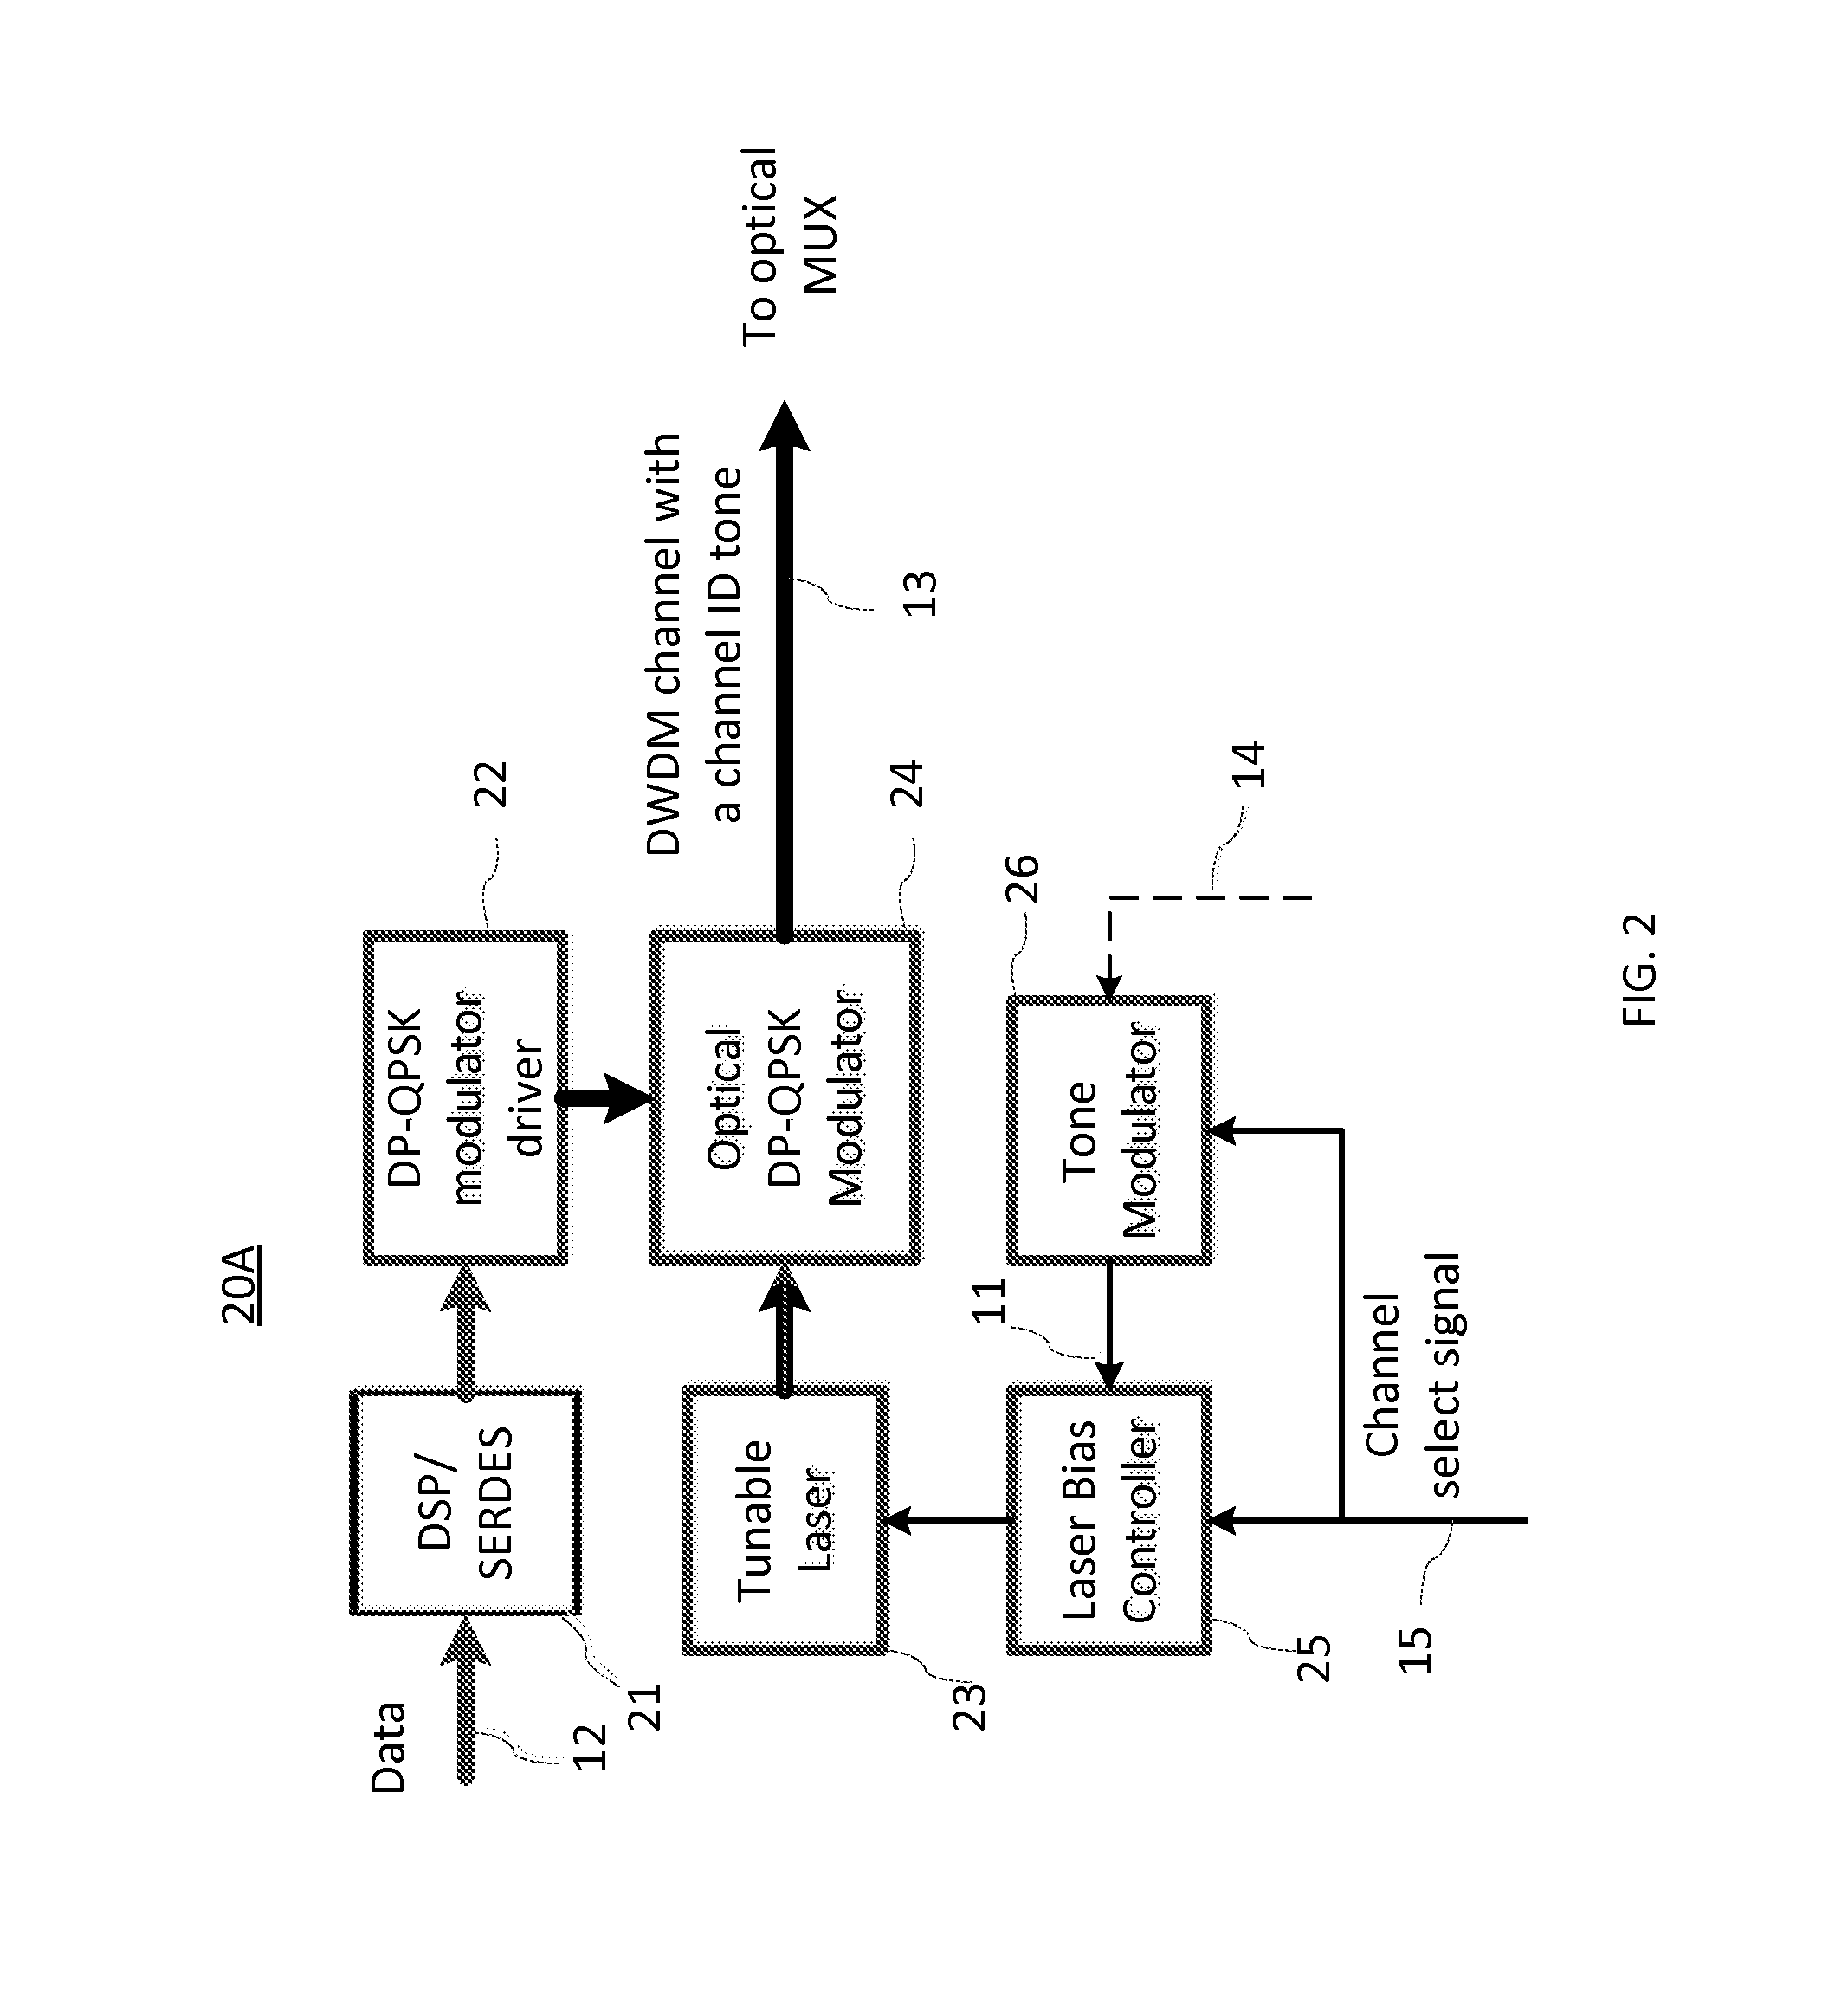 Tunable coherent optical receiver and method